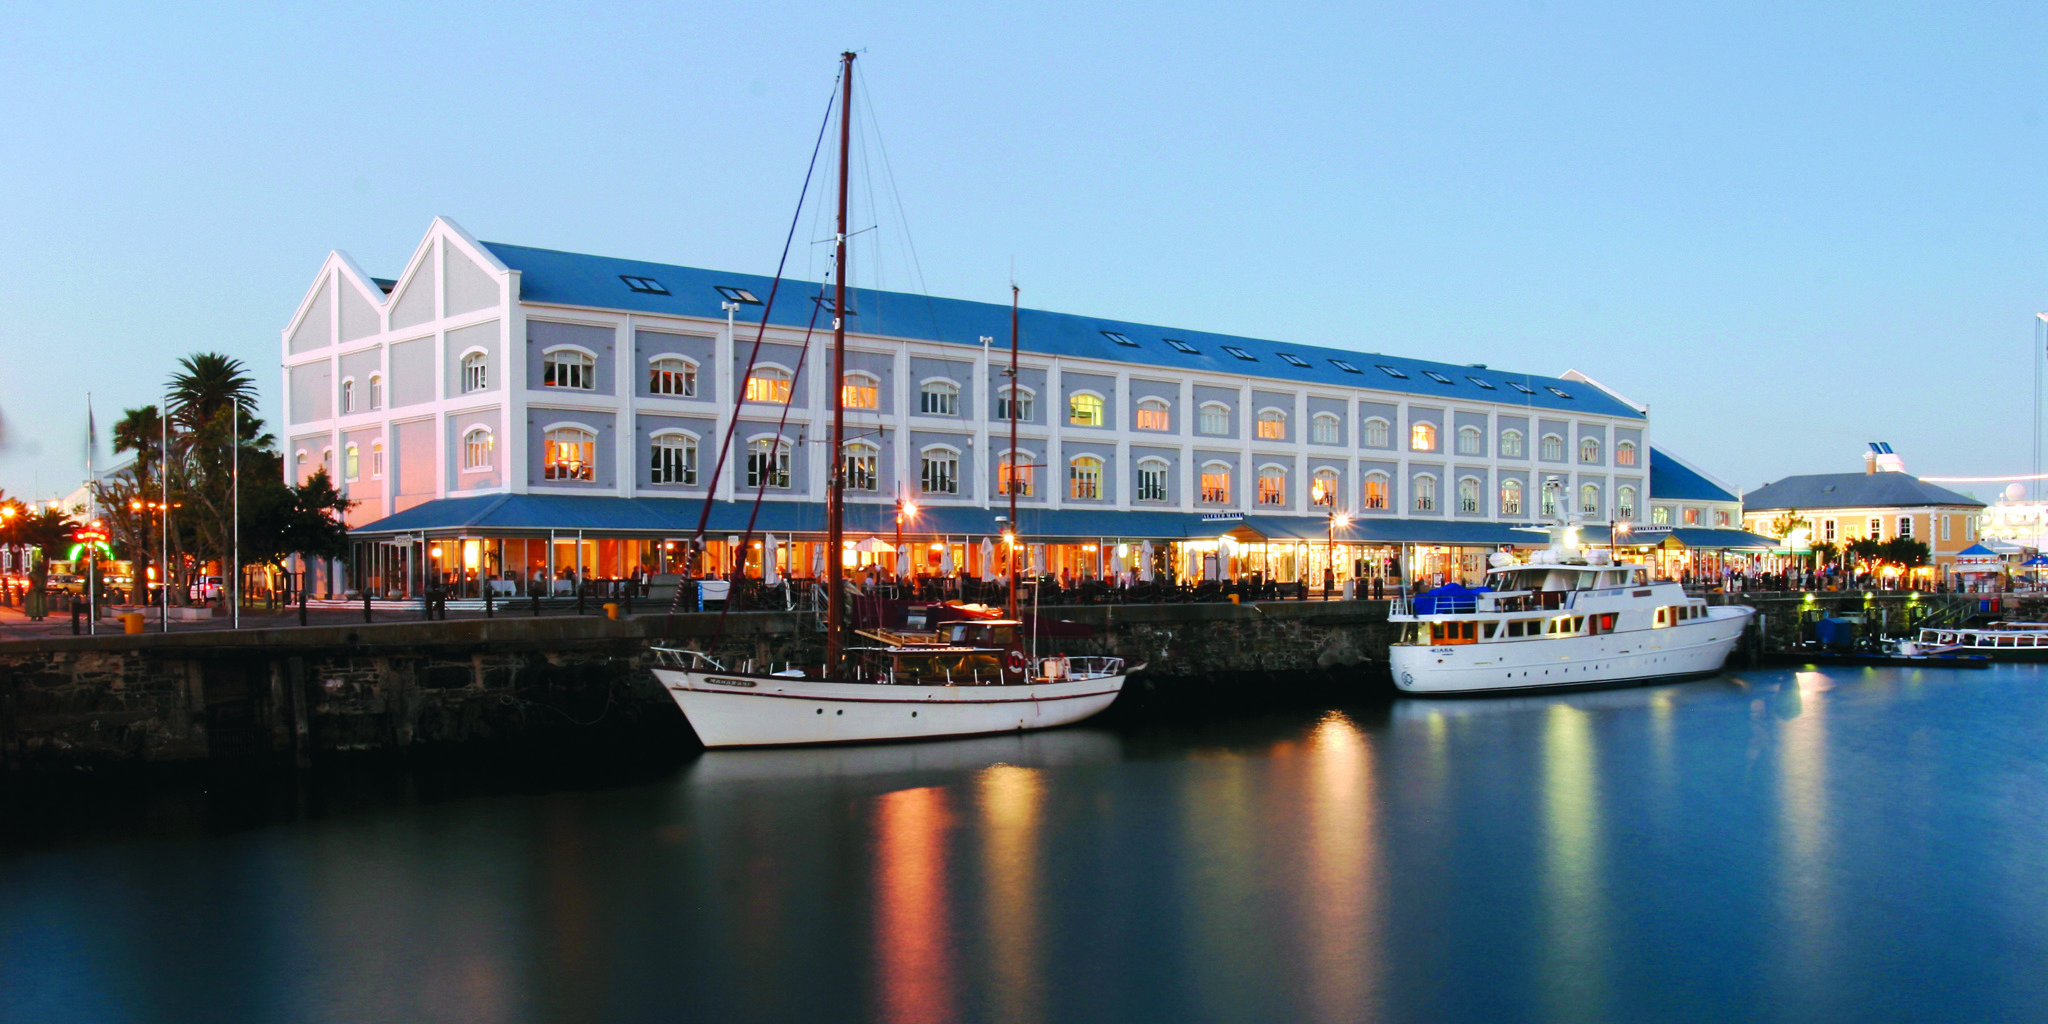 Things to do at Victoria & Alfred Waterfront